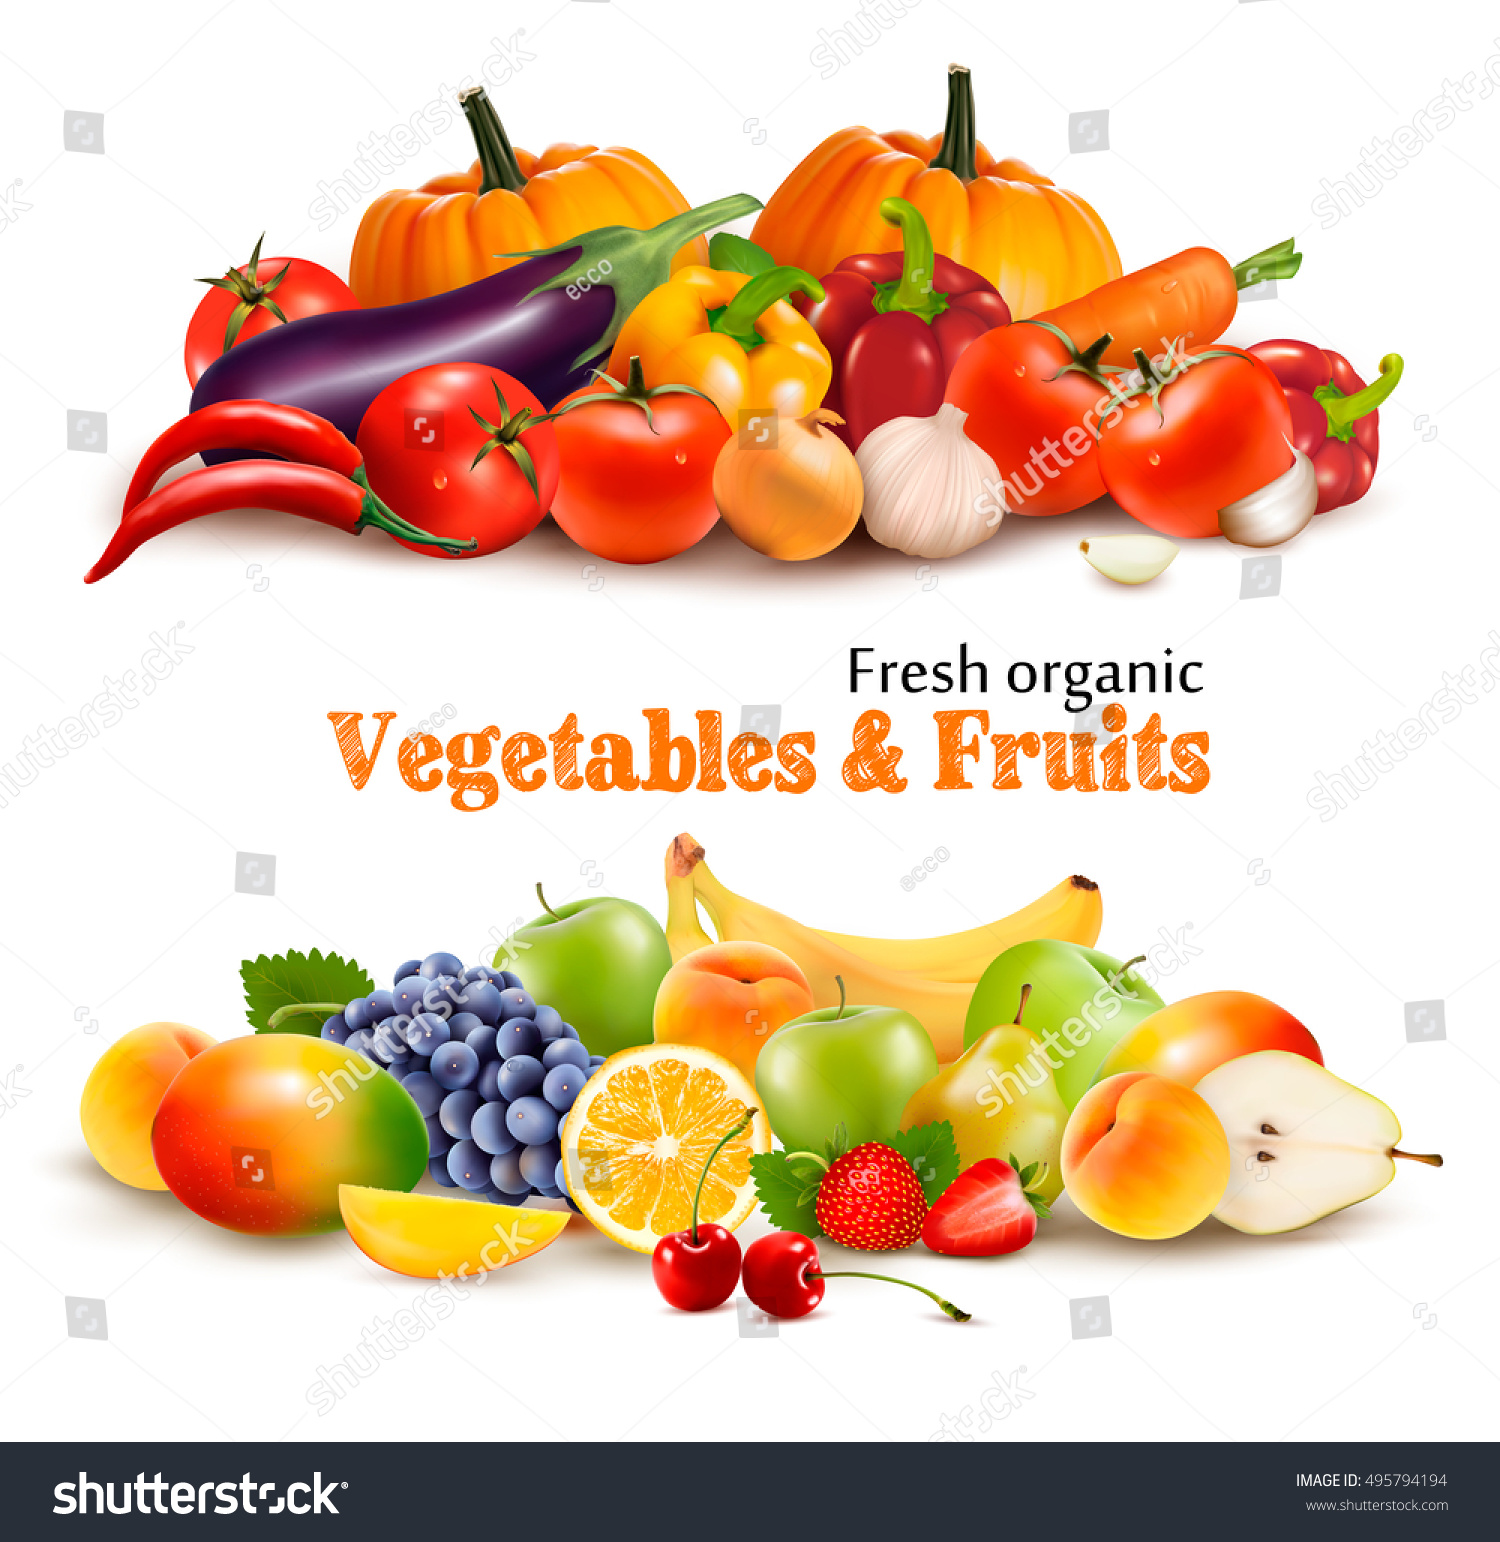 Background With Organic Fresh Vegetables. and Fruits Healthy Food. Vector illustration #495794194